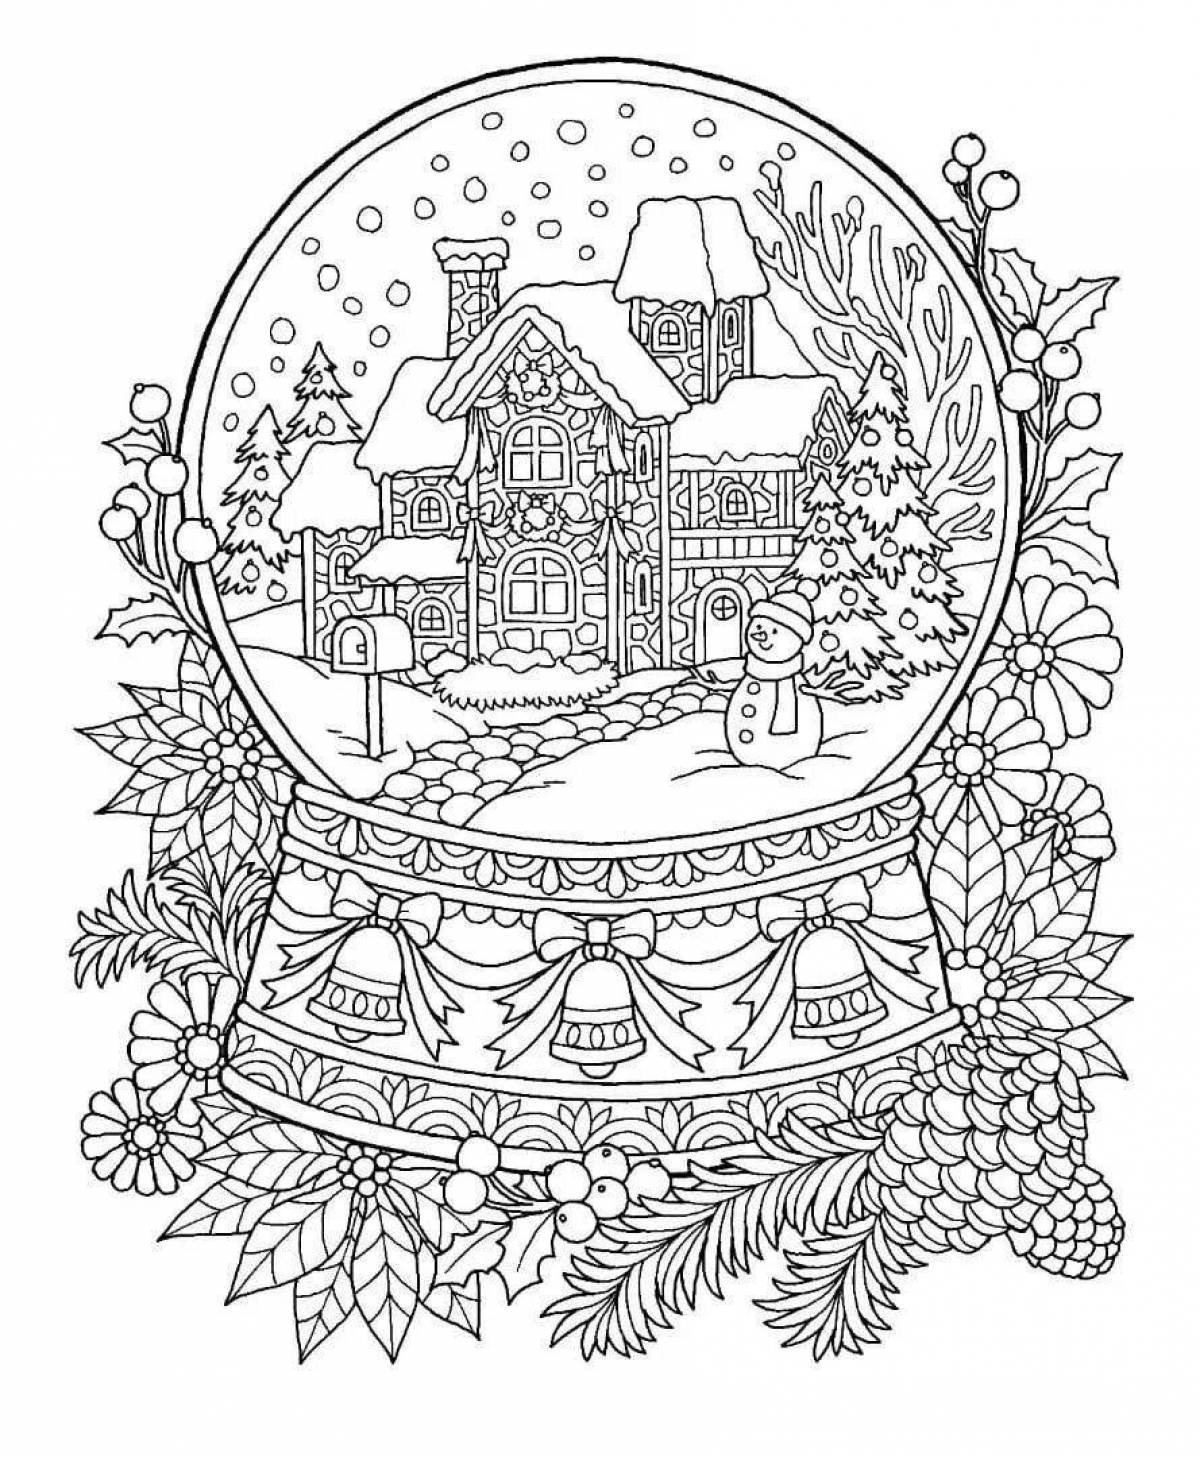 Awesome winter hard coloring book